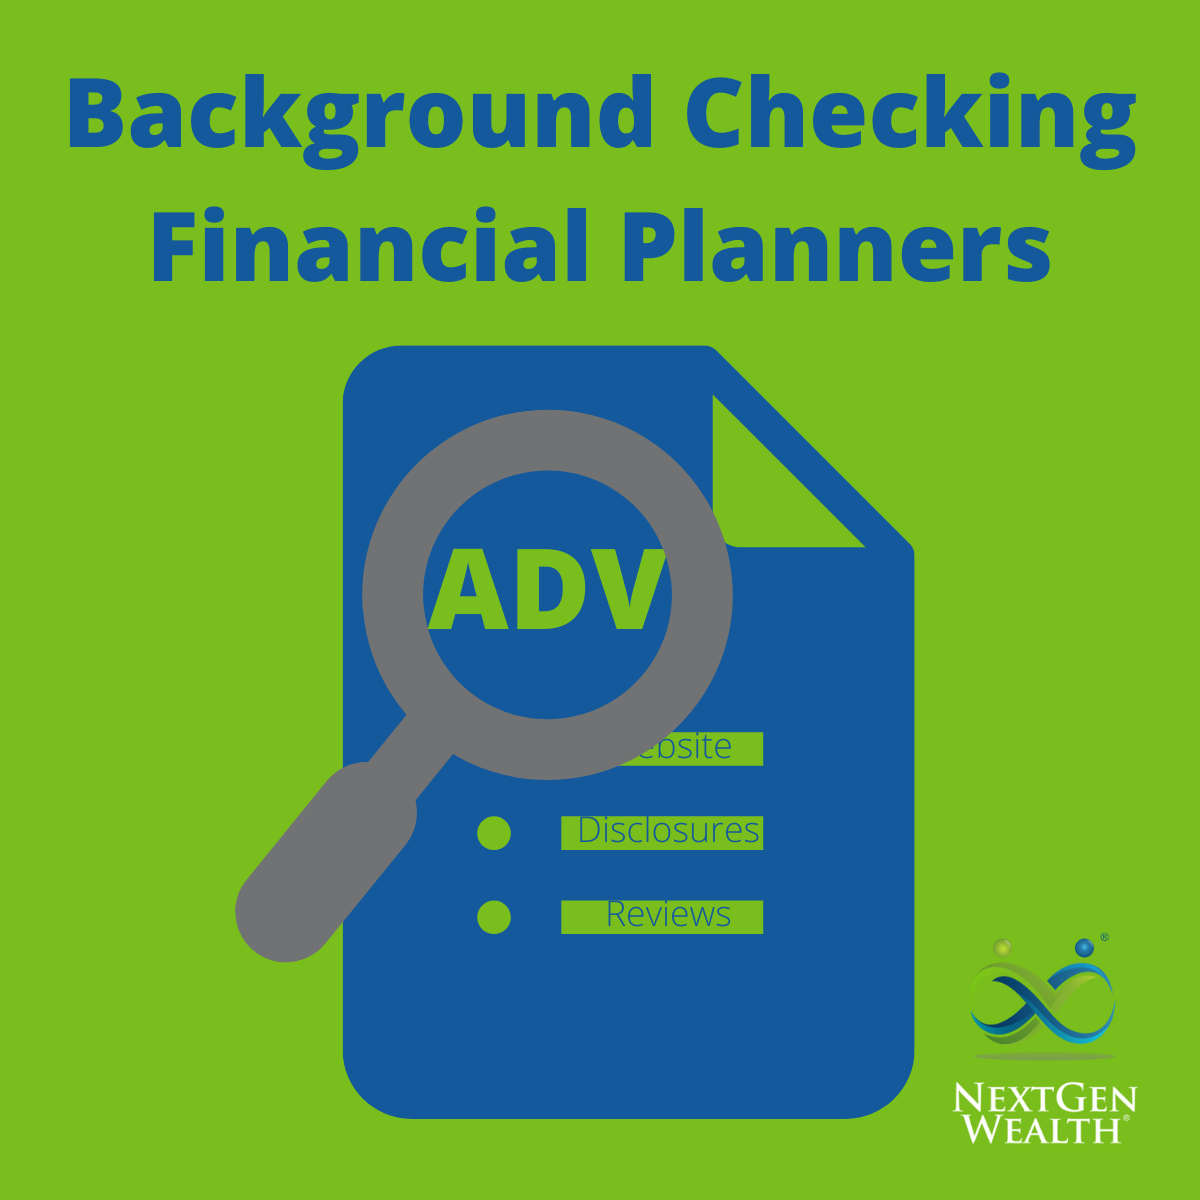 Background checking a Financial Planner